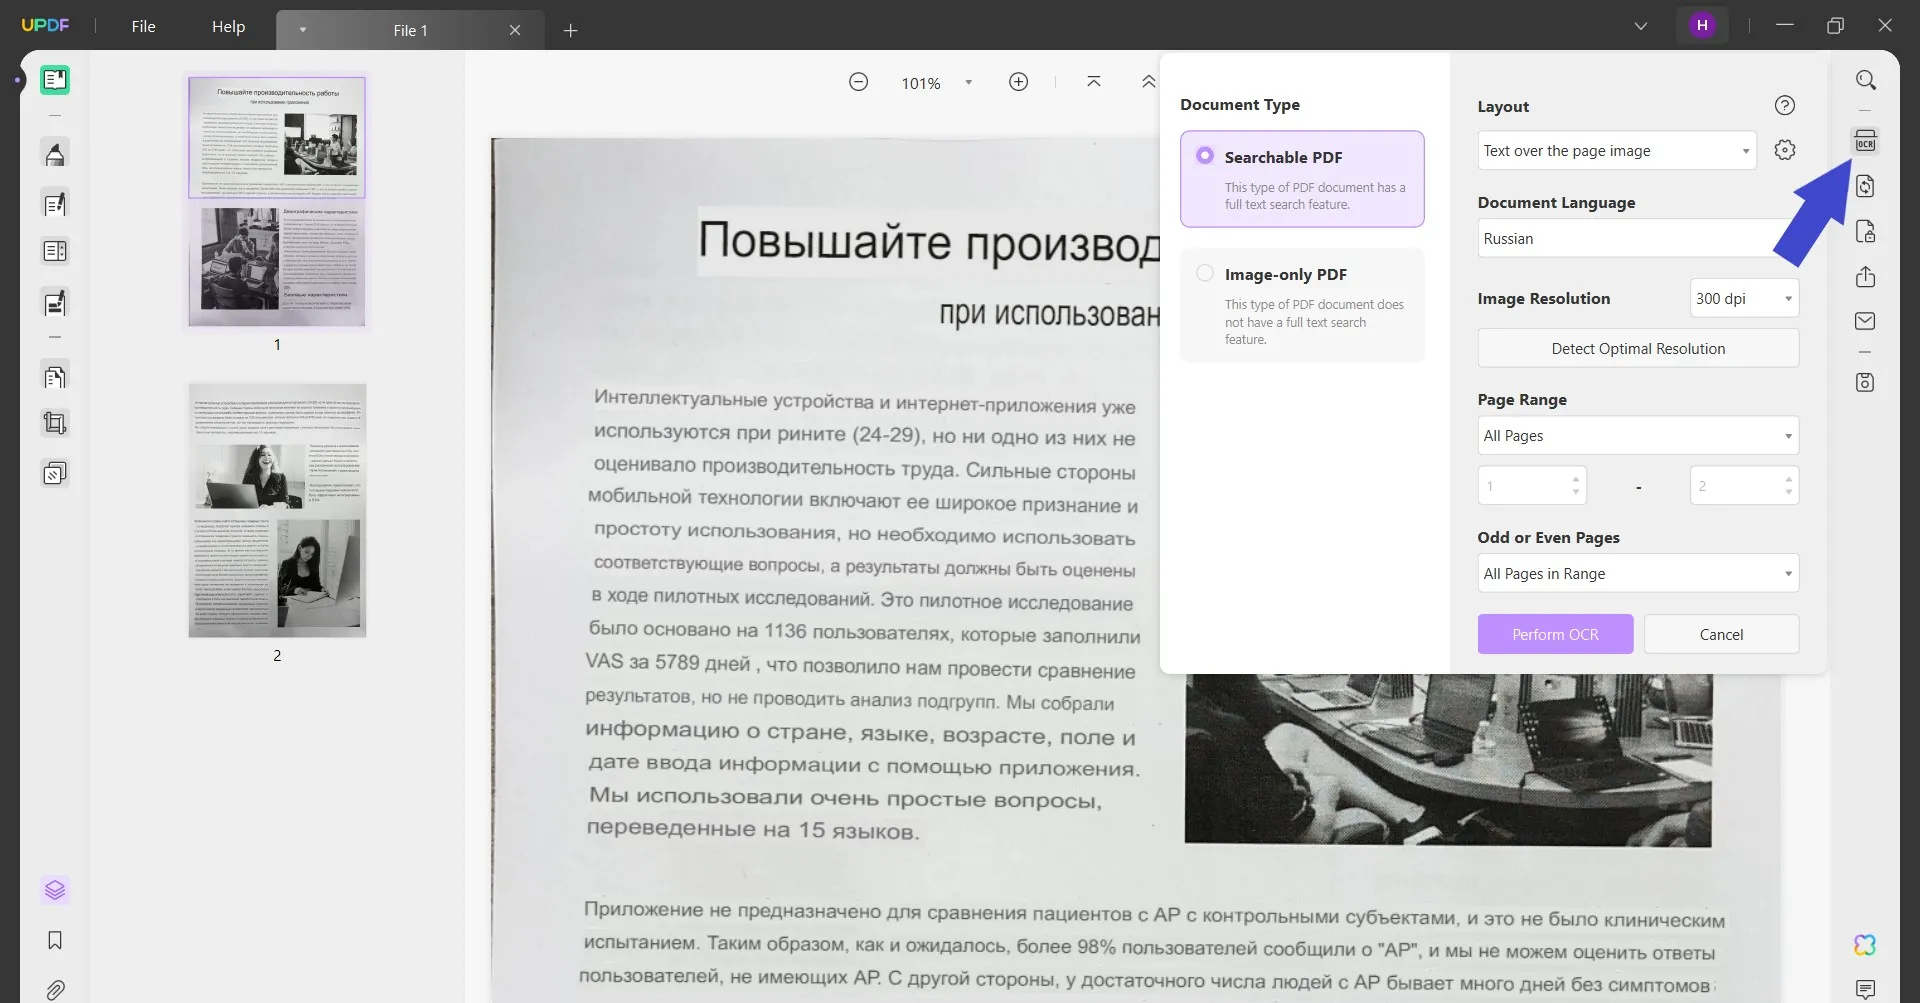 translate image russian to english perform ocr